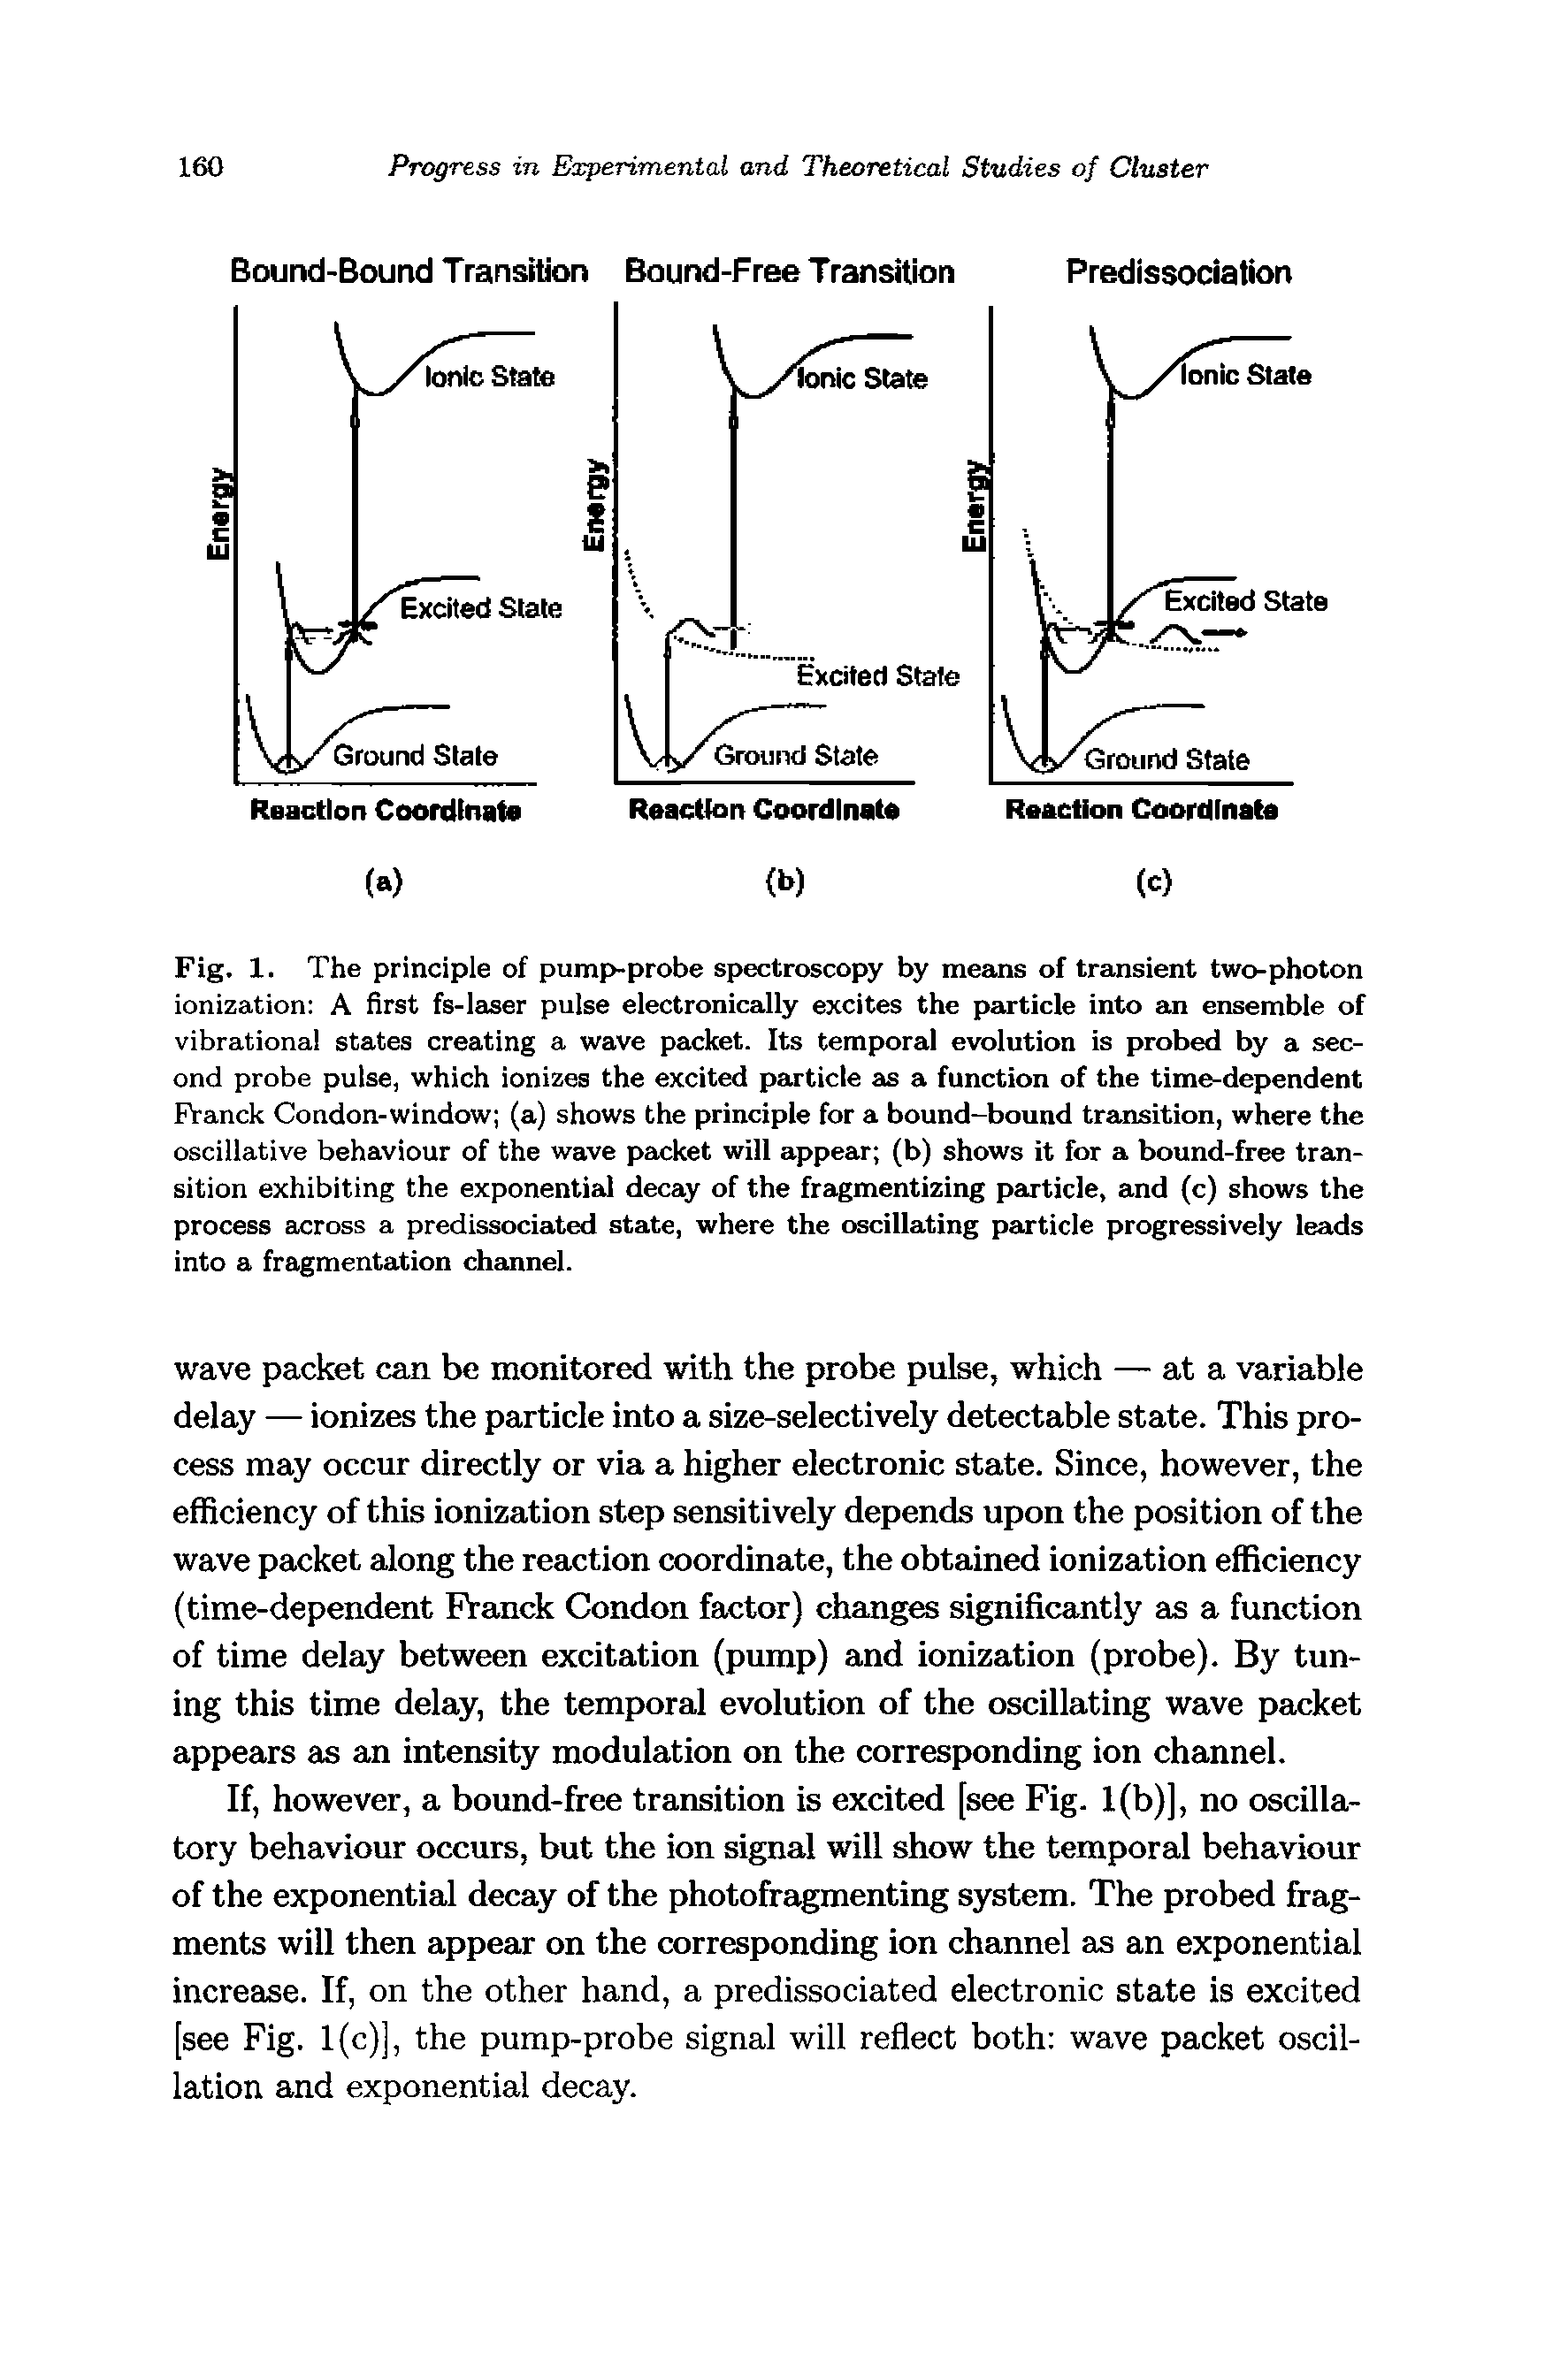 Fig. 1. The principle of pumjvprobe spectroscopy by means of transient two-photon ionization A first fs-laser pulse electronically excites the particle into an ensemble of vibrational states creating a wave packet. Its temporal evolution is probed by a second probe pulse, which ionizes the excited particle as a function of the time-dependent Franck Condon-window (a) shows the principle for a bound-bound transition, where the oscillative behaviour of the wave packet will appear (b) shows it for a bound-free transition exhibiting the exponential decay of the fragmentizing particle, and (c) shows the process across a predissociated state, where the oscillating particle progressively leads into a fragmentation channel.